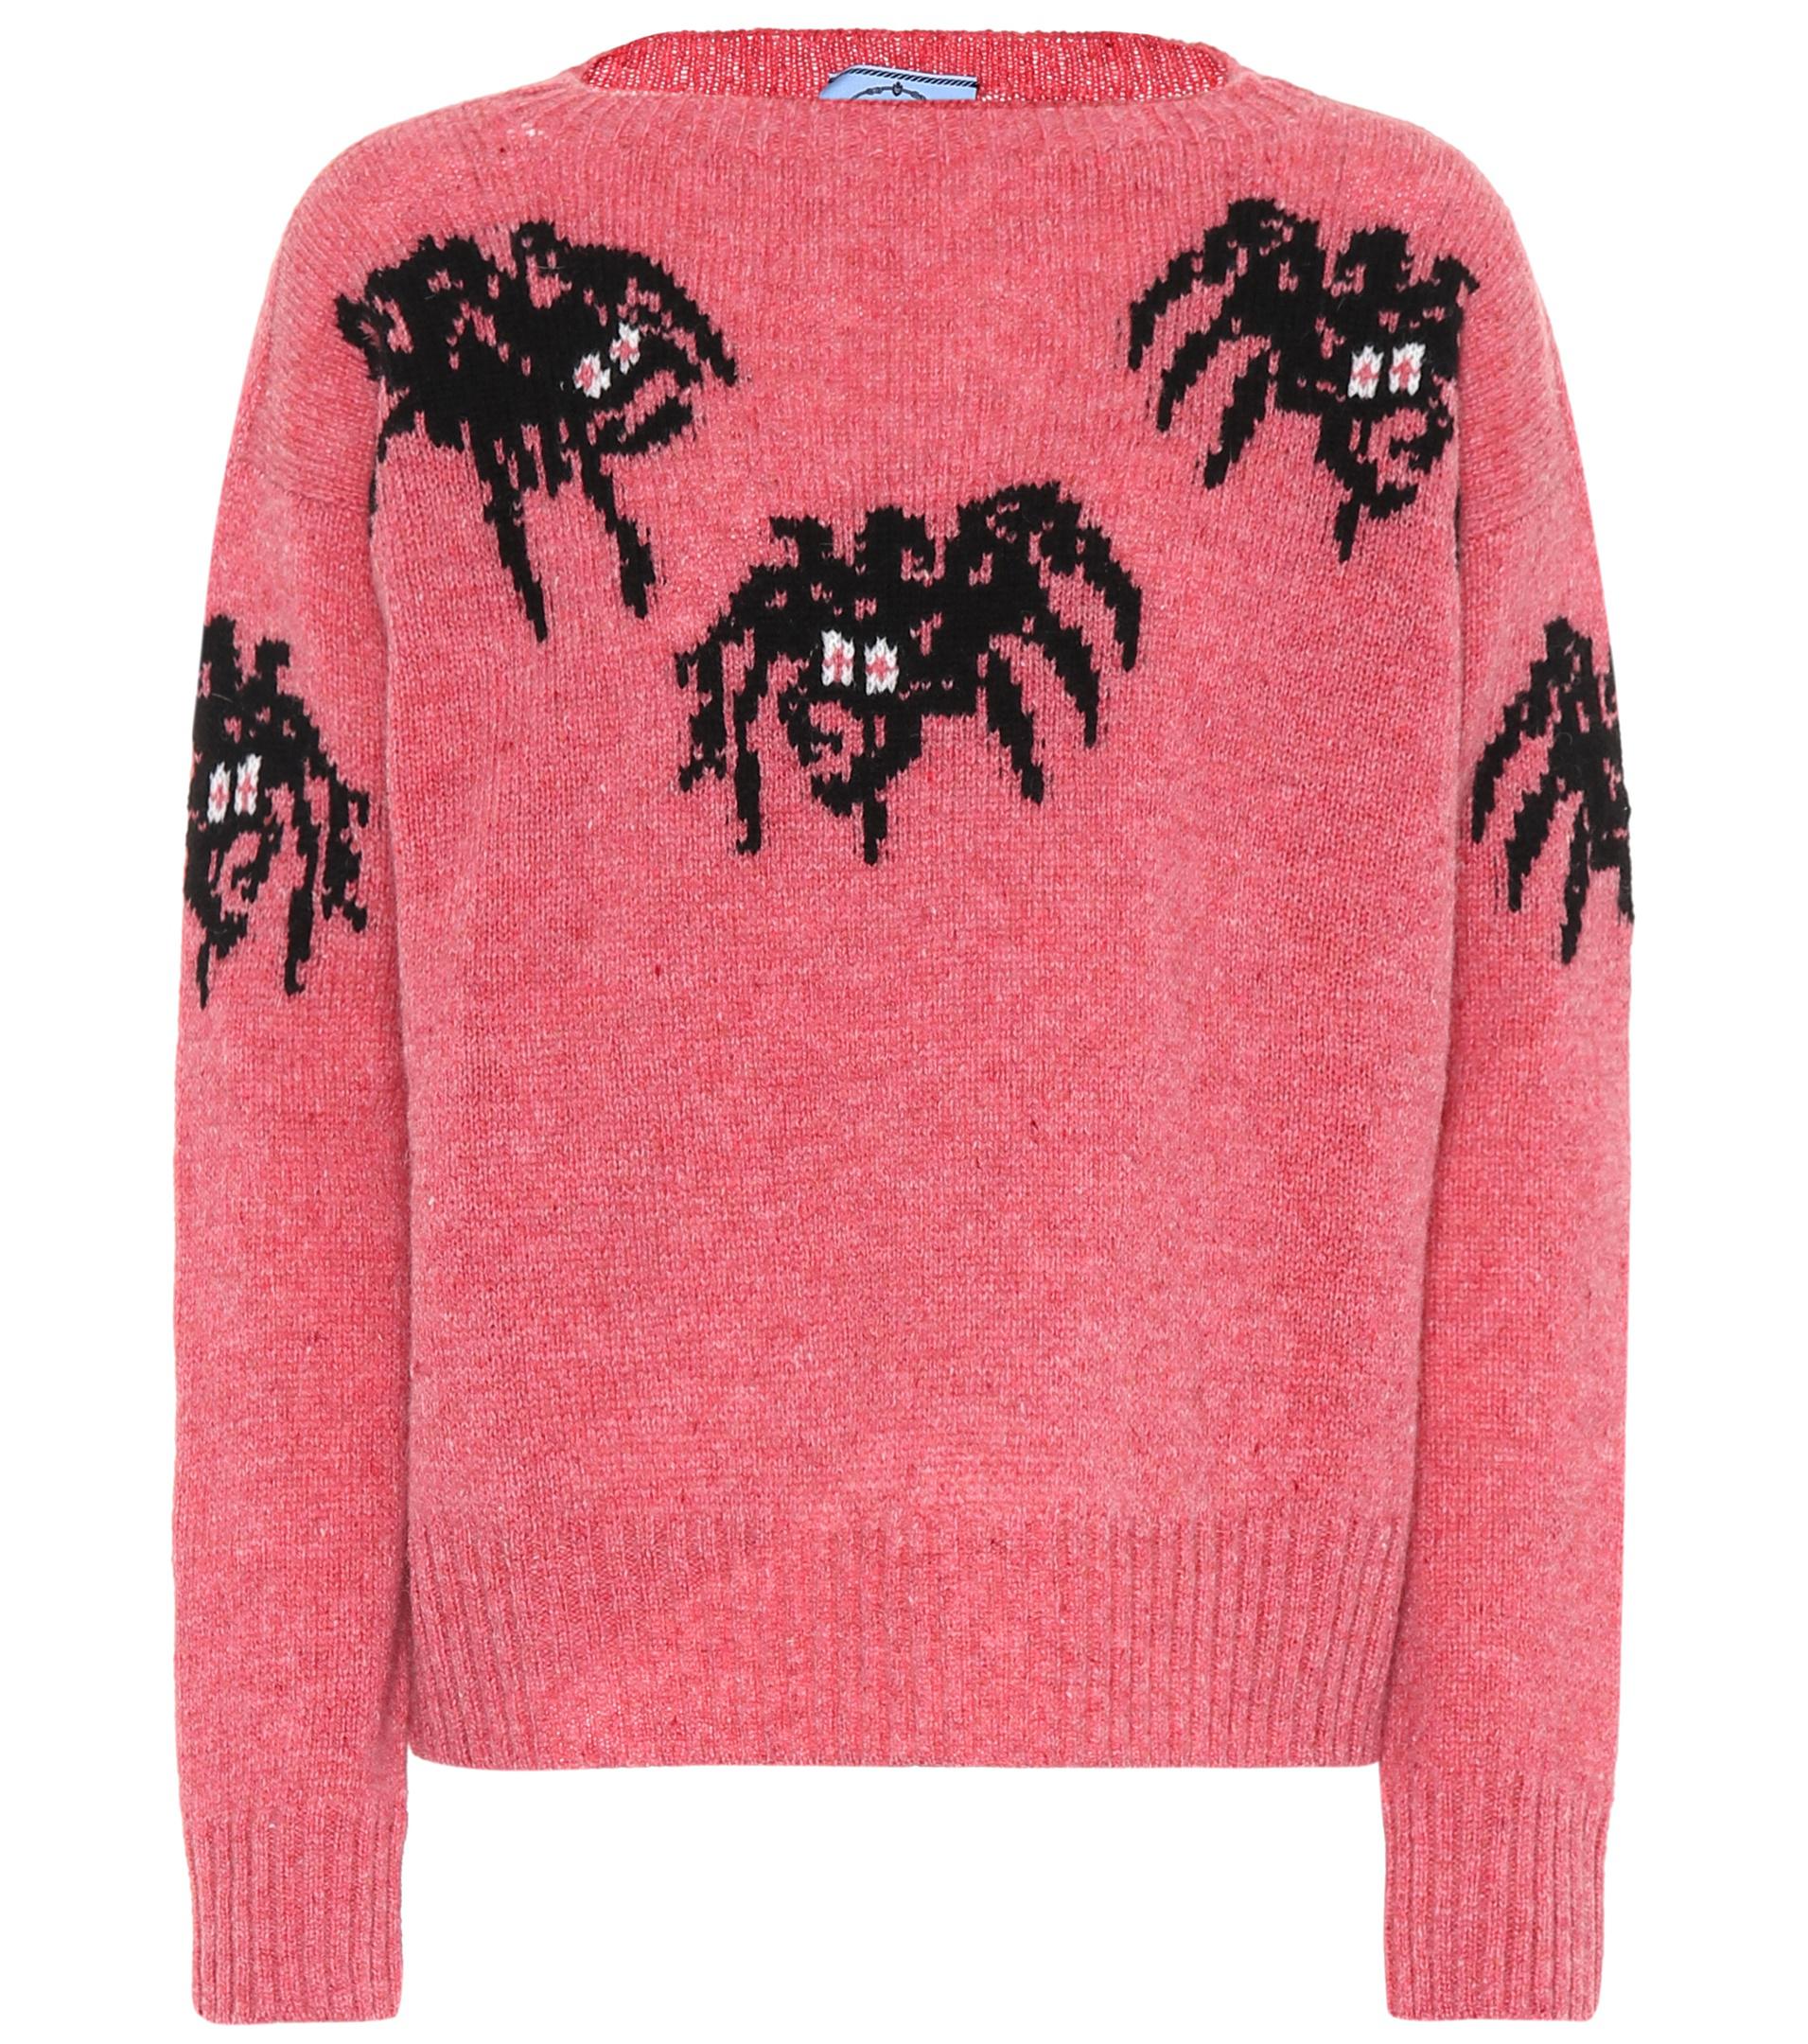 Spider Sweater Outlet, 53% OFF | www.accede-web.com